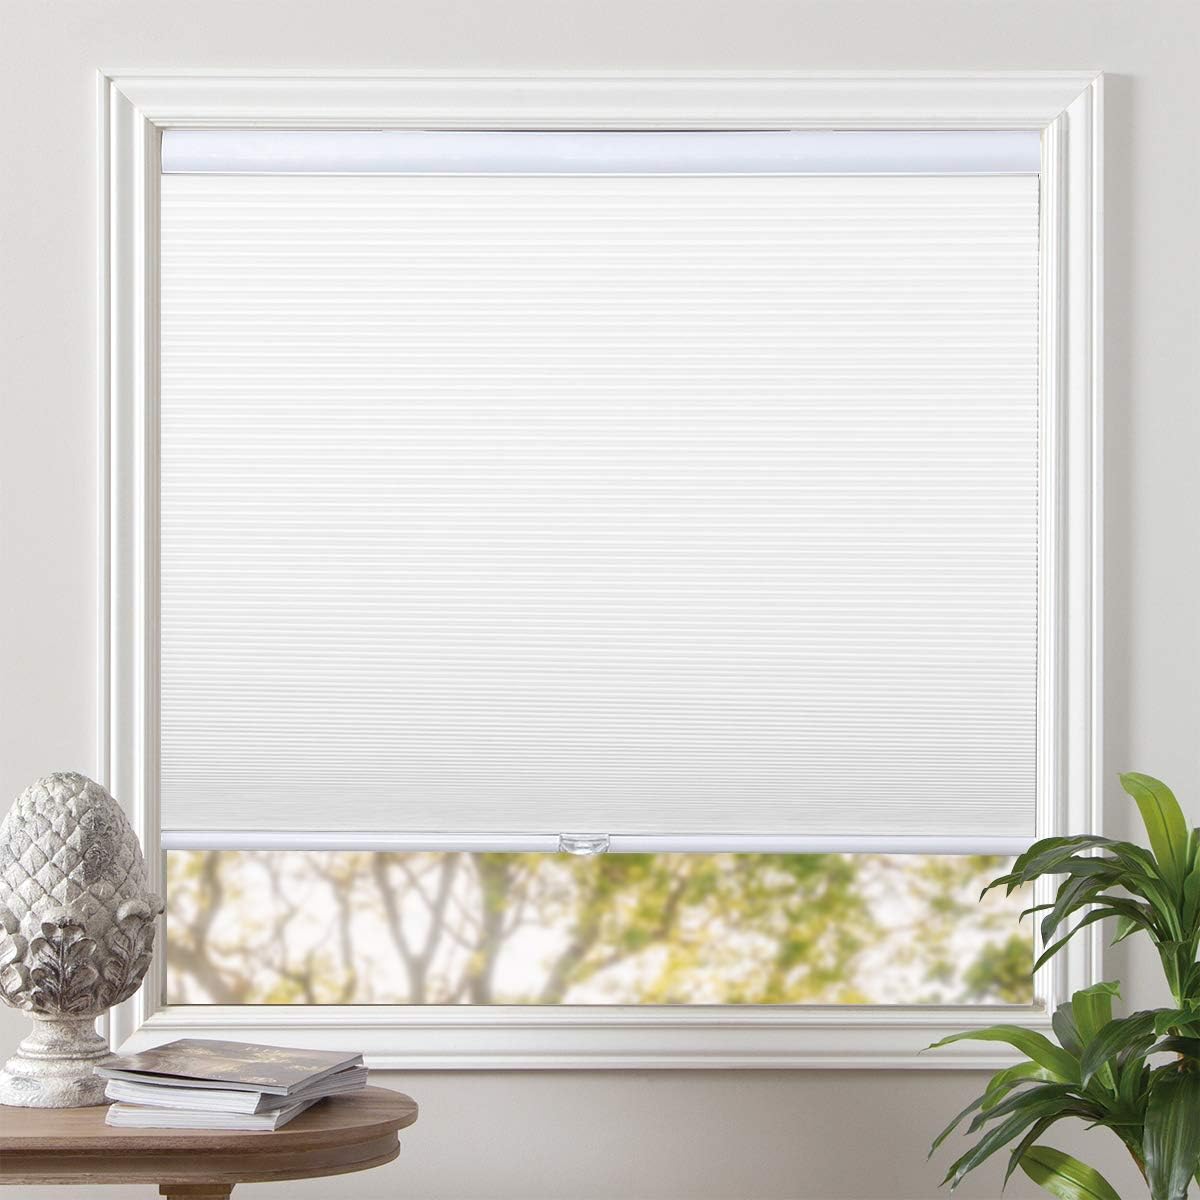 Blackout Shades Cordless Blinds Cellular Fabric Blinds [...]